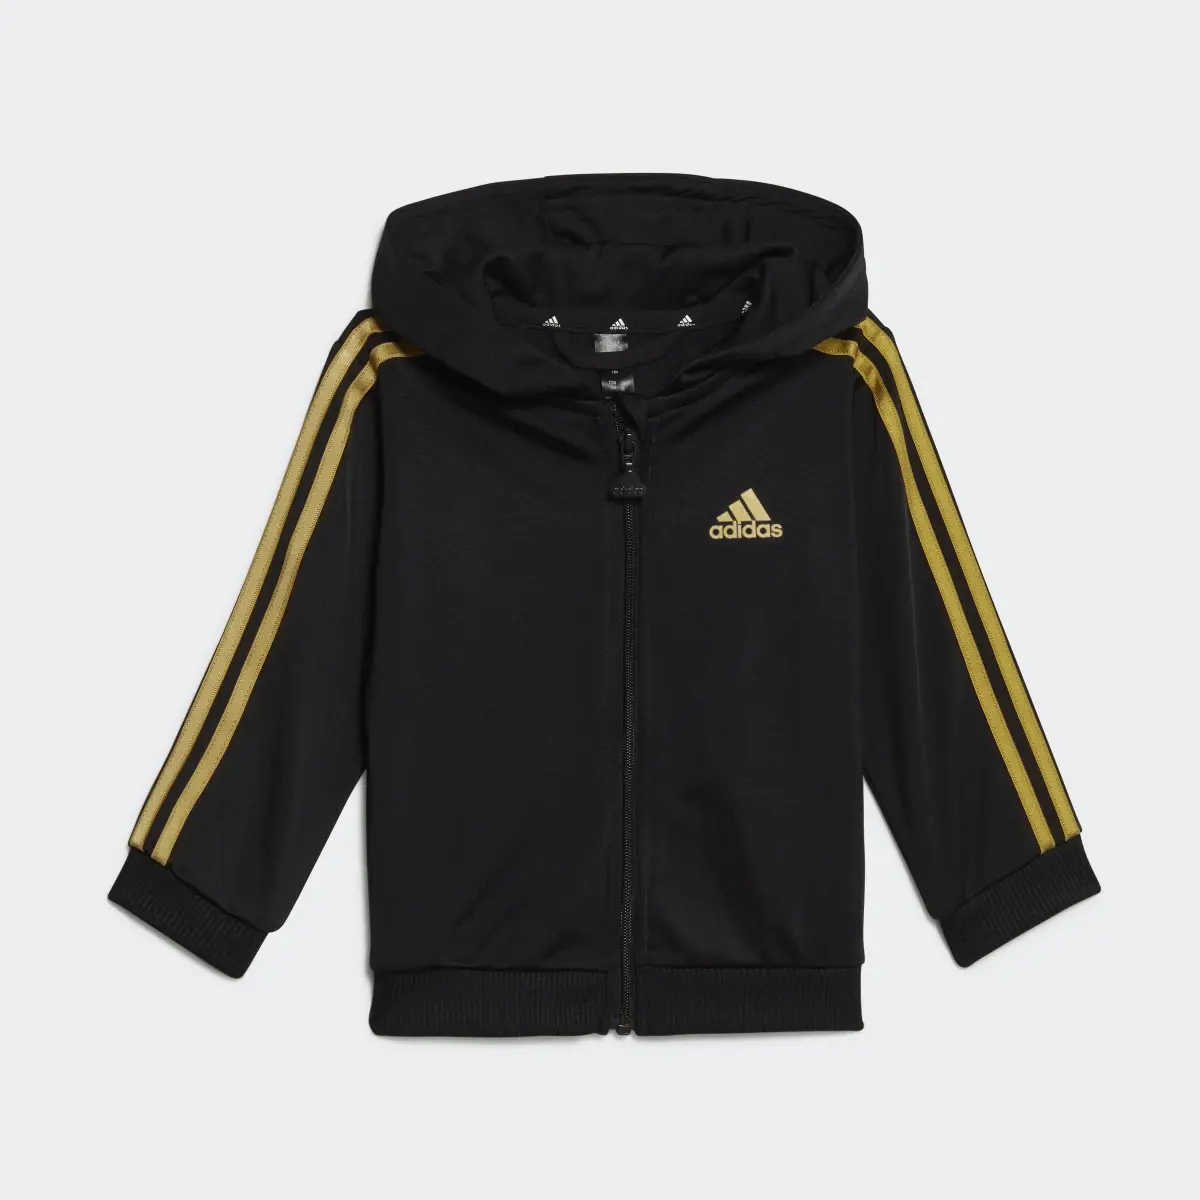 Adidas Essentials Shiny Hooded Track Suit. 3